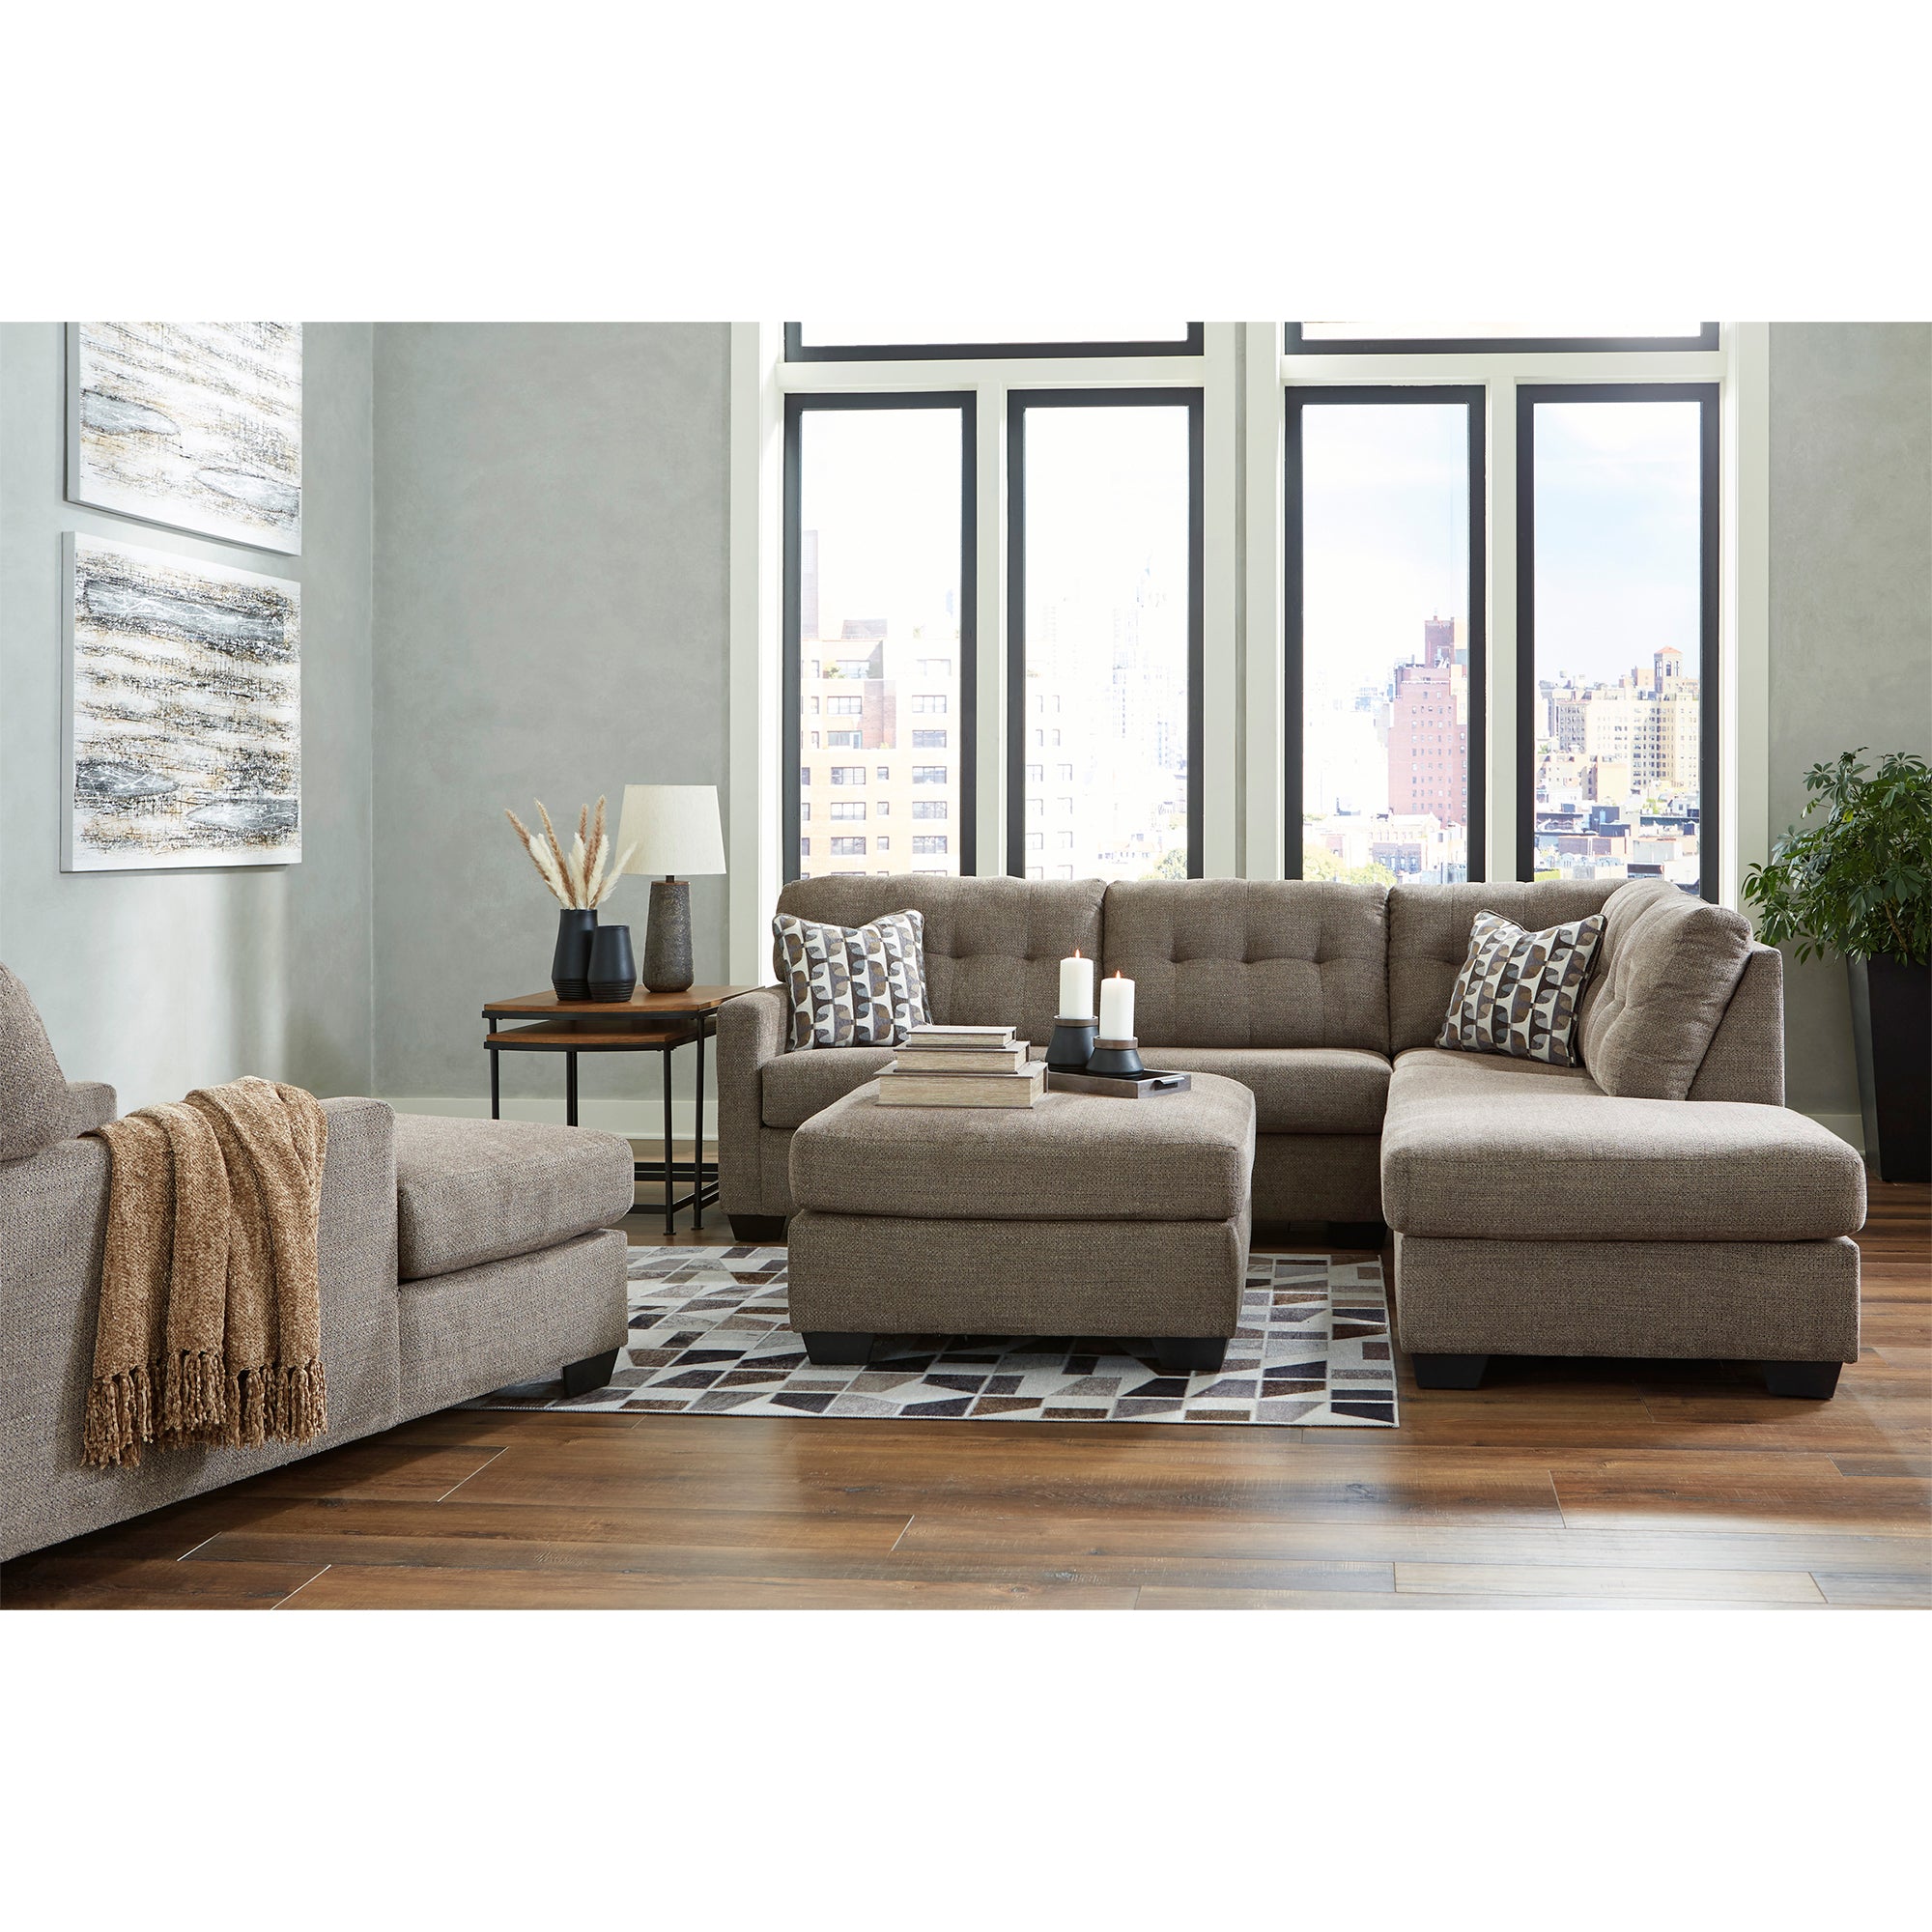 Sophisticated Mahoney Sectional in chocolate with chaise, a statement piece for any living room